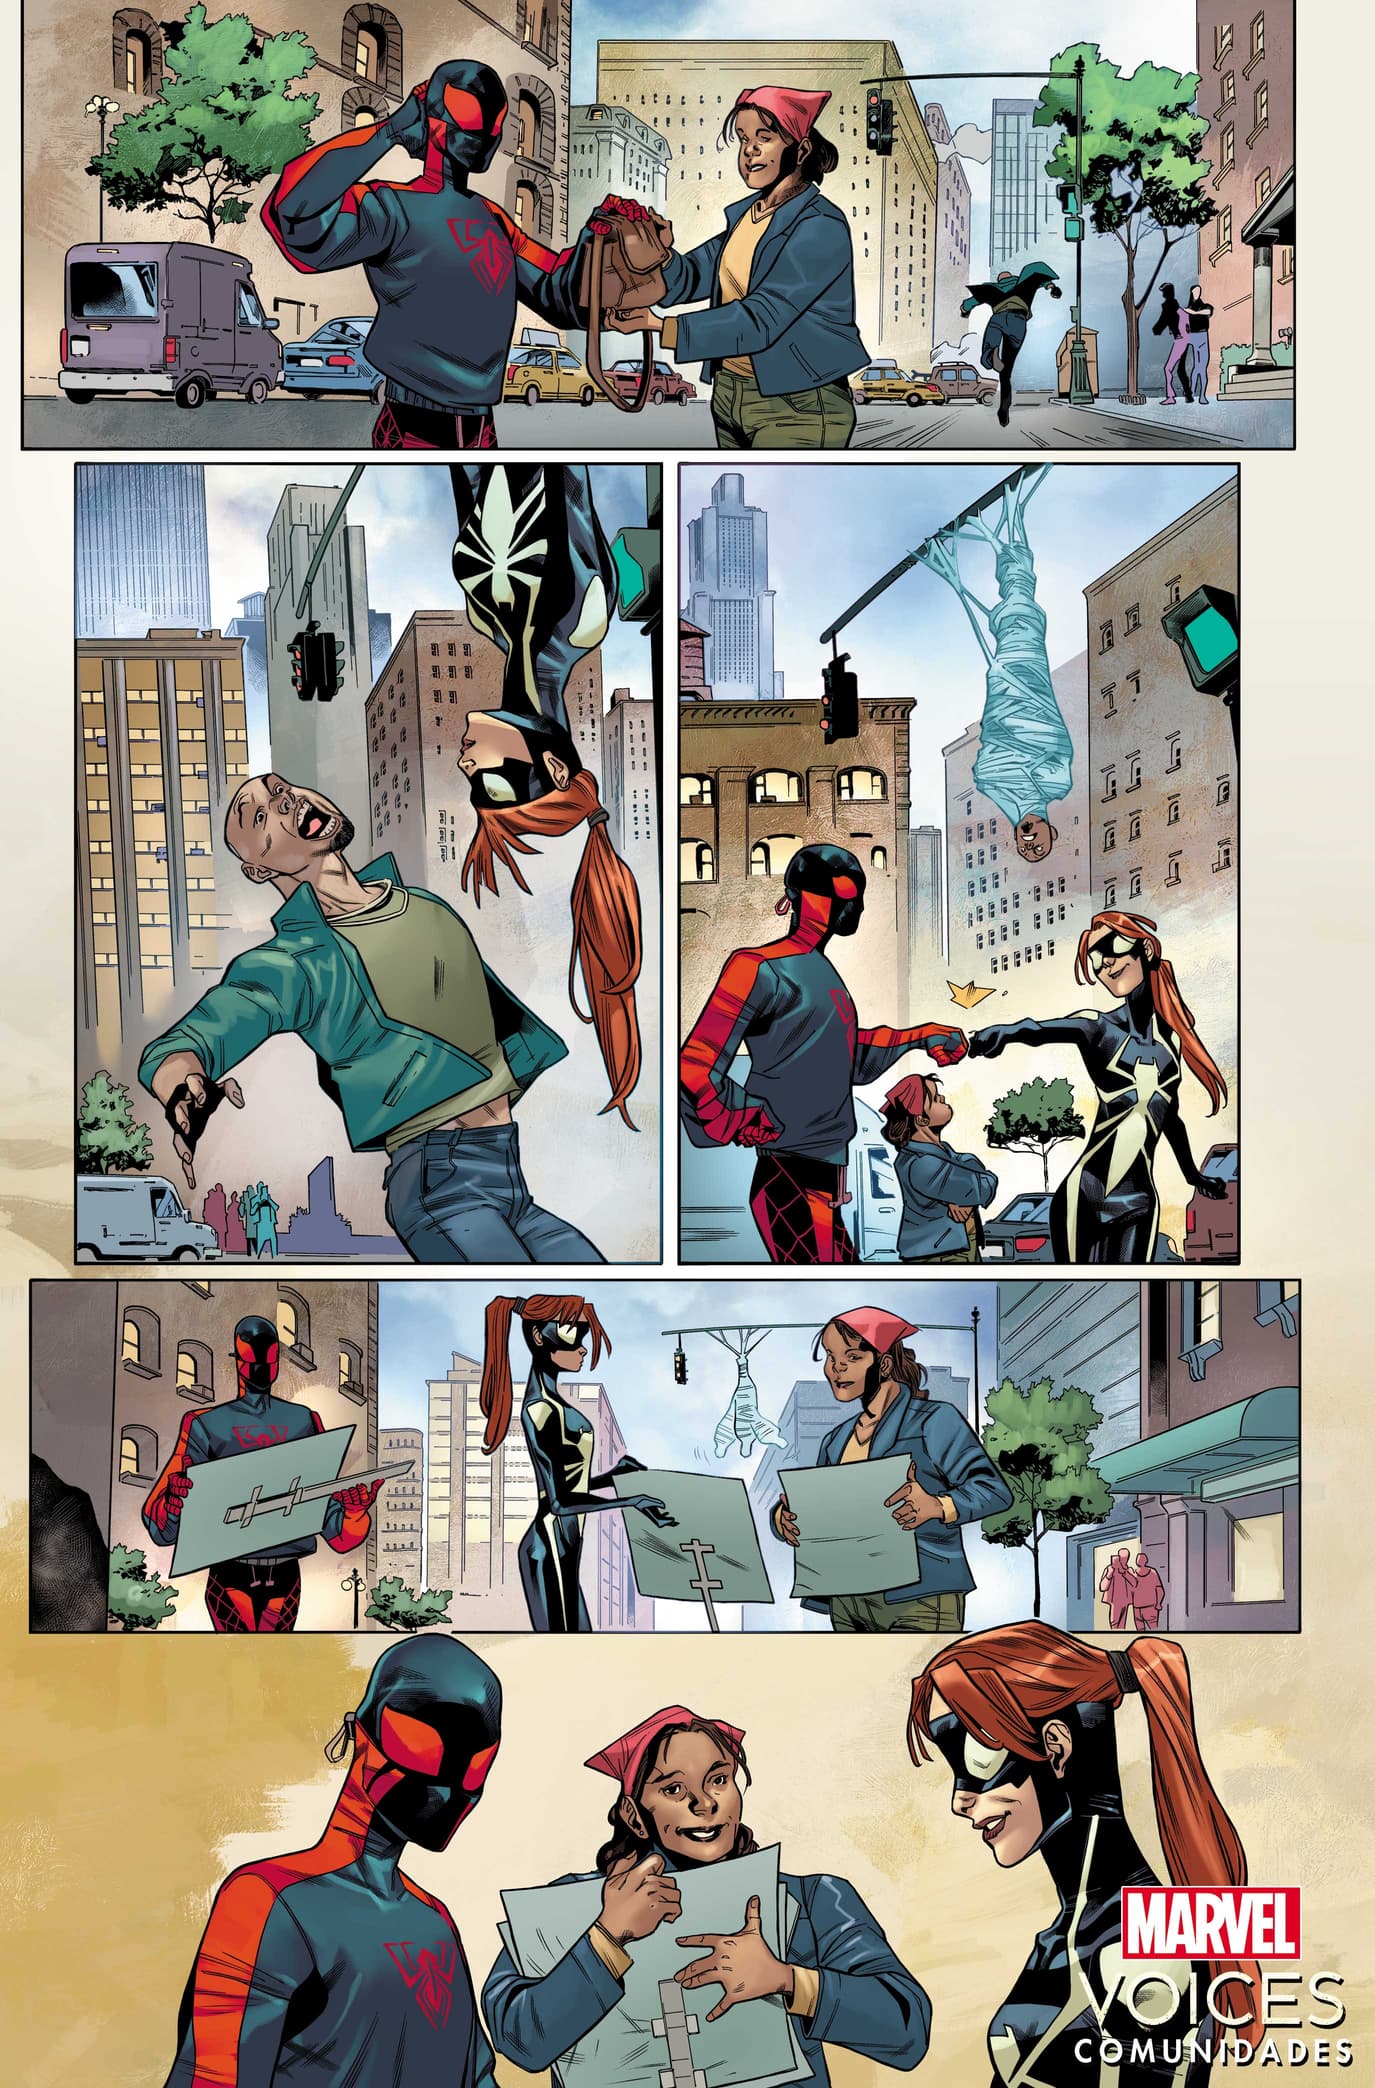 MARVEL'S VOICES: COMUNIDADES #1 preview art by Enid Balám with inks by Oren Junior and colors by Federico Blee